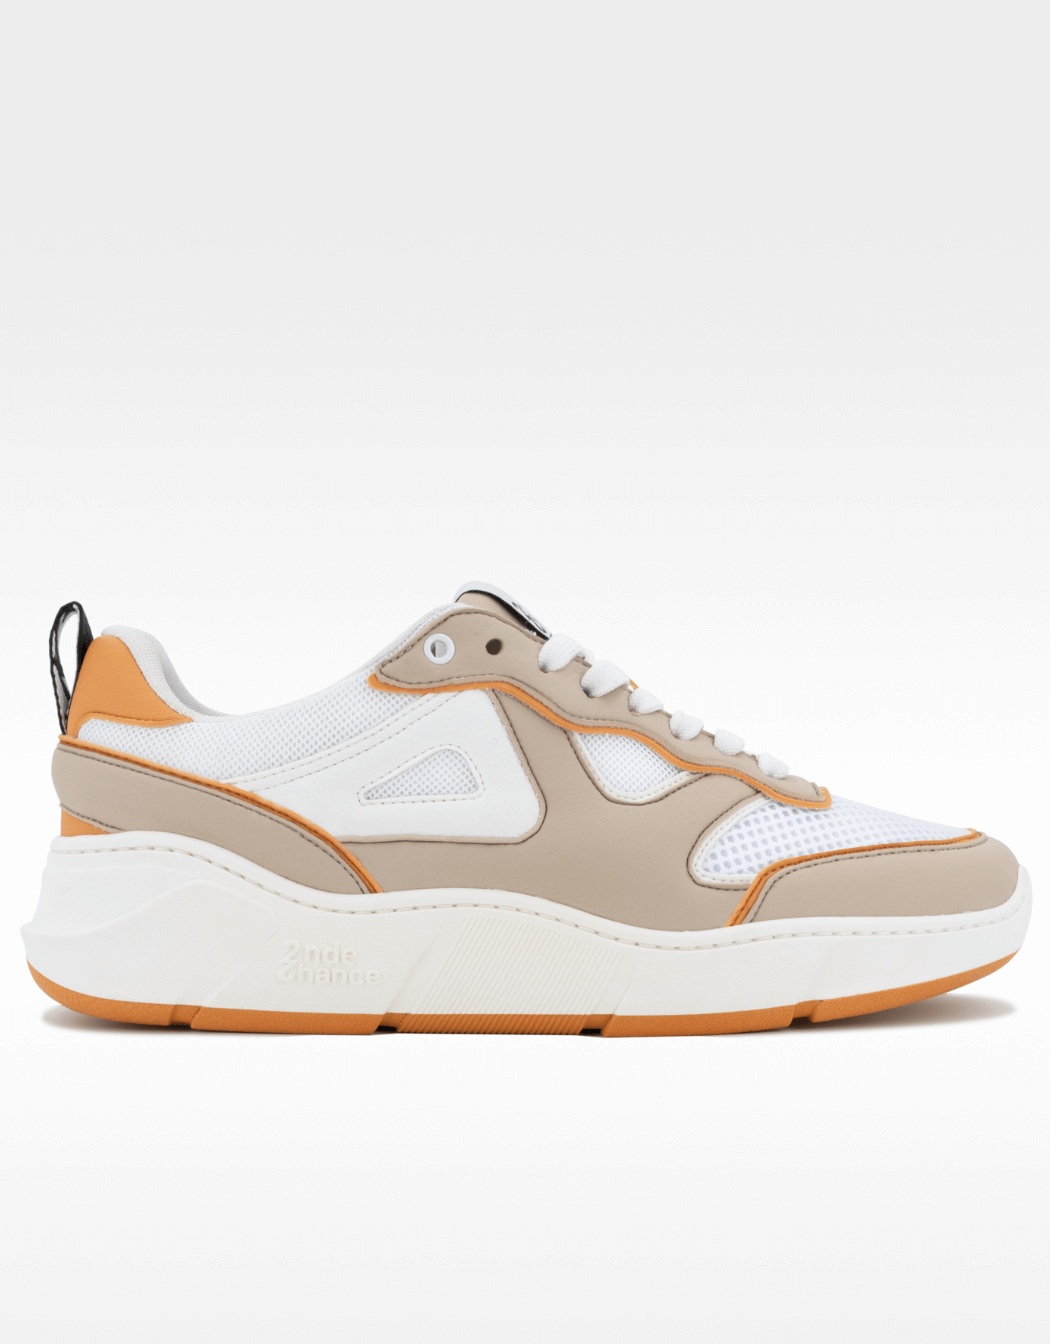 sneakers-neo-loopr3-2ndechance-camel-recyclees-recyclable-madeinfrance-cote